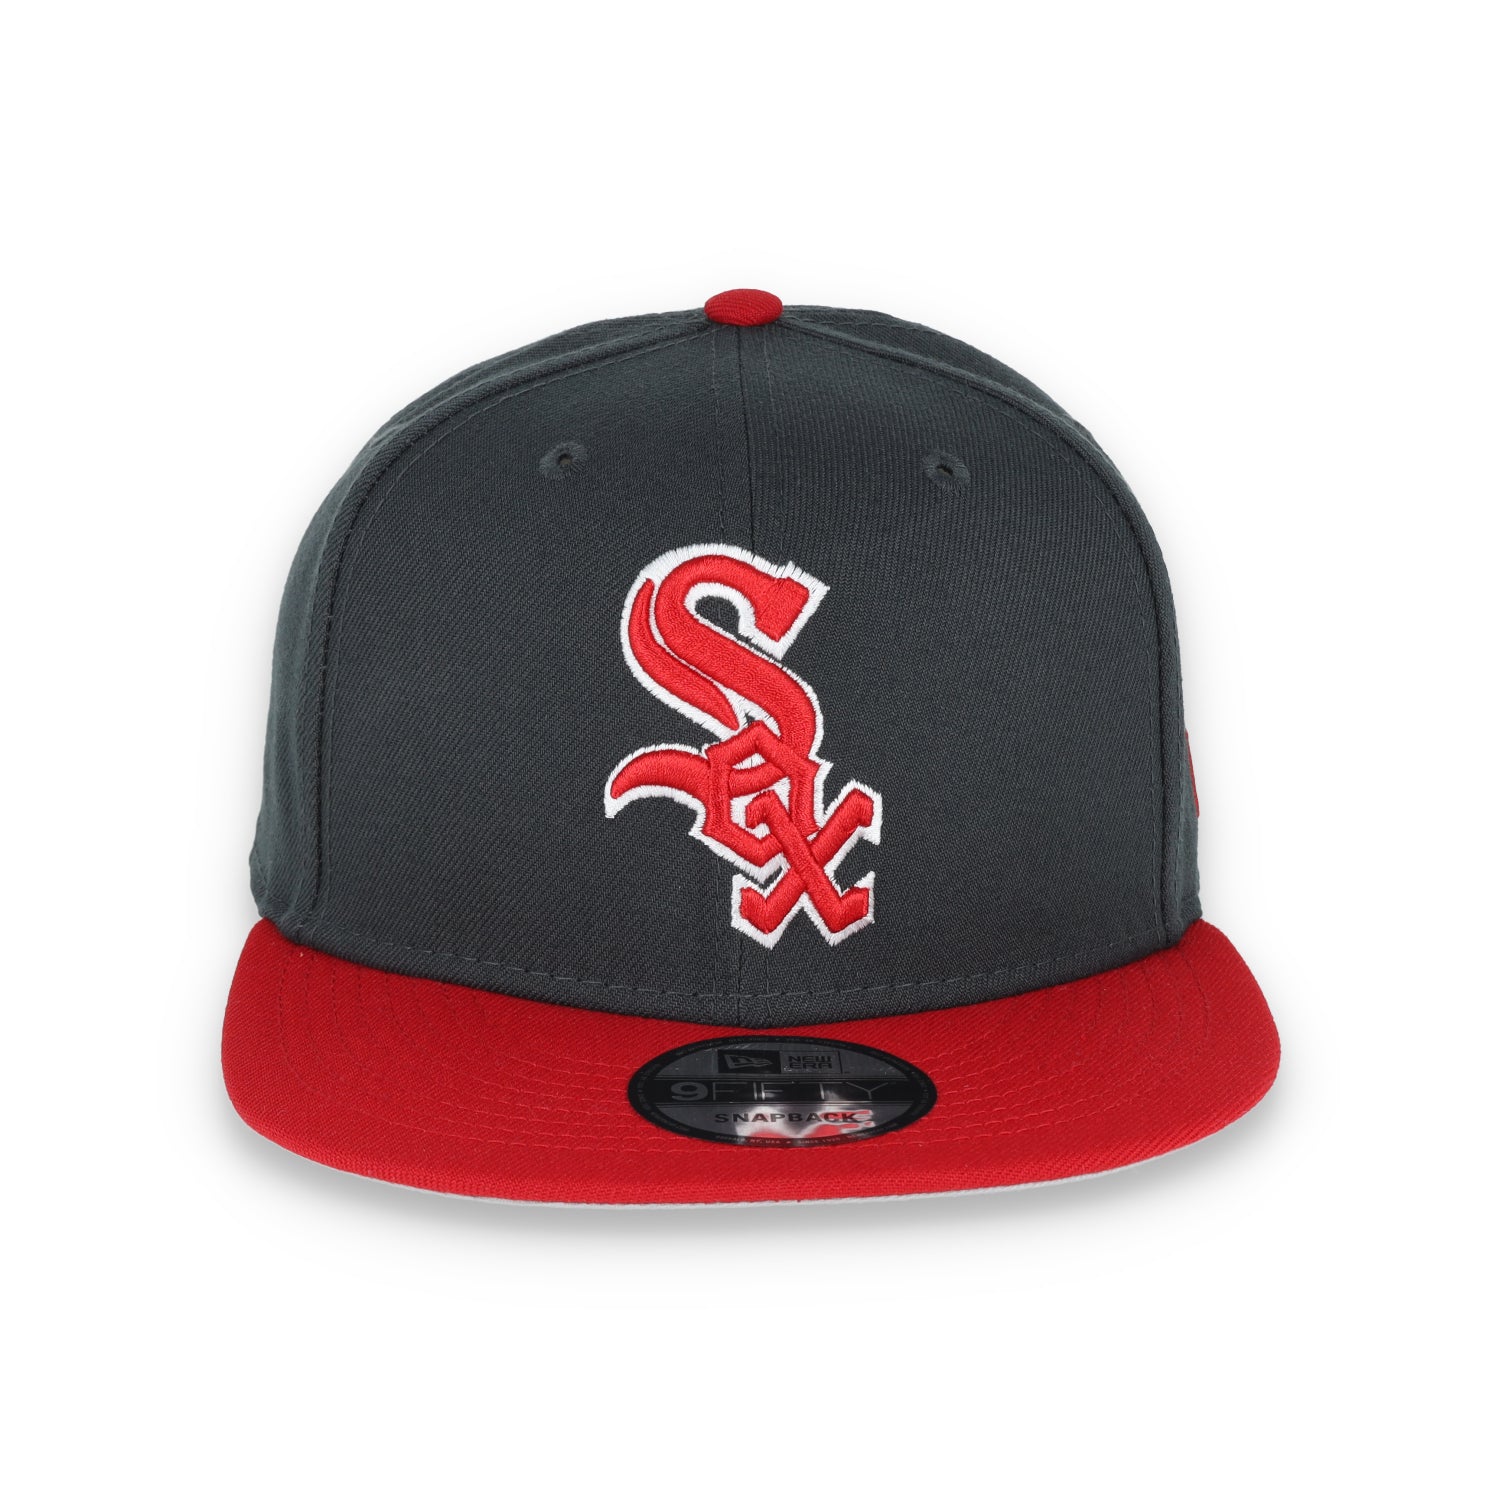 New Era Chicago White Sox 2-Tone Color Pack 9FIFTY Snapback Hat-Grey/Scarlet